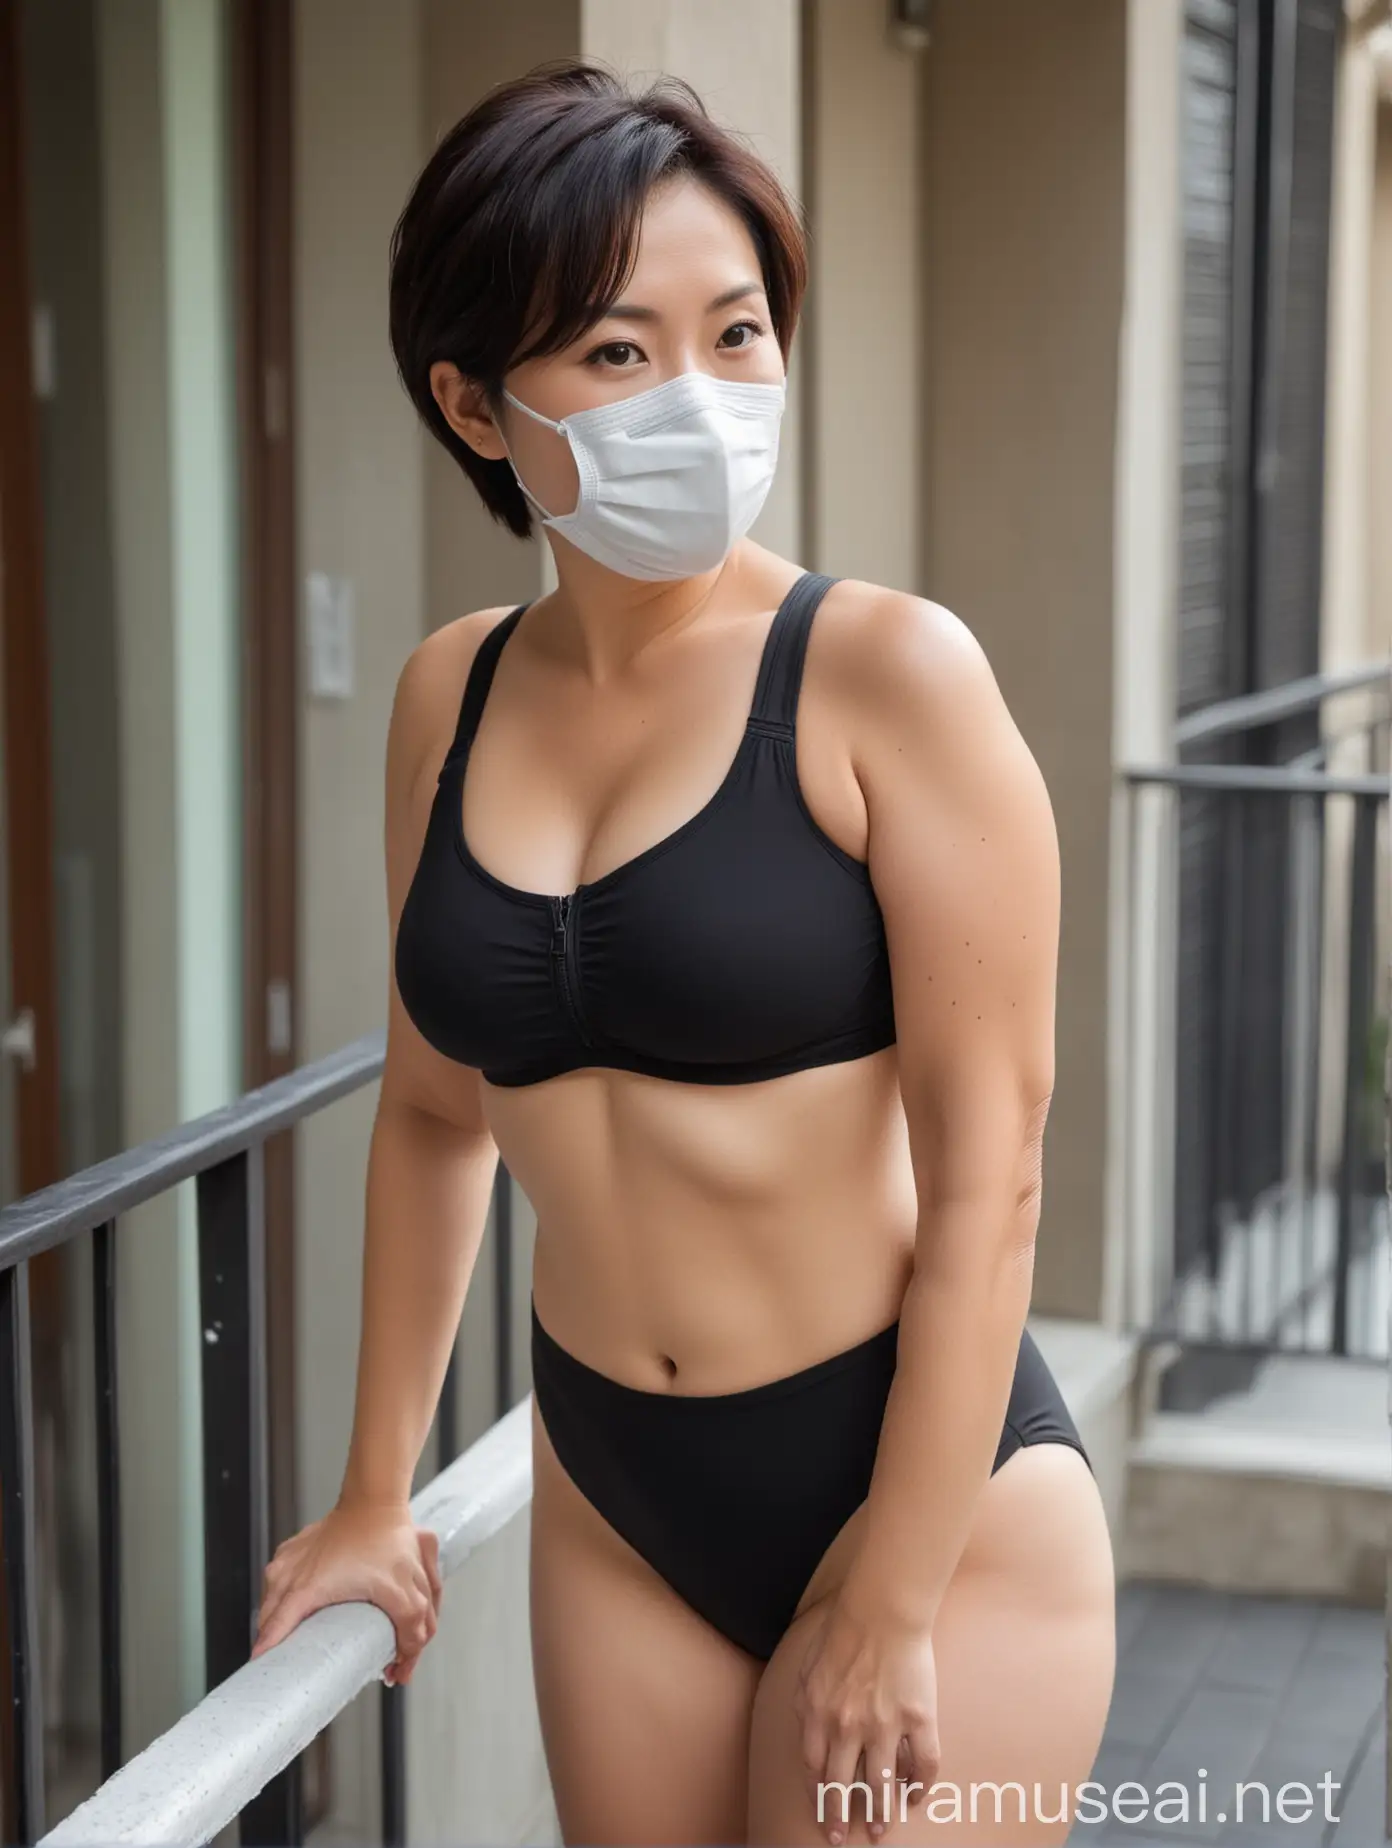 an attractive, full-bodied, buxom chinese woman in her late 30s, with short hair, with a respirator mask, leaning on a balcony railing, wearing a white with black trim padded front-zip sports bra, and french cut swimsuit bottoms